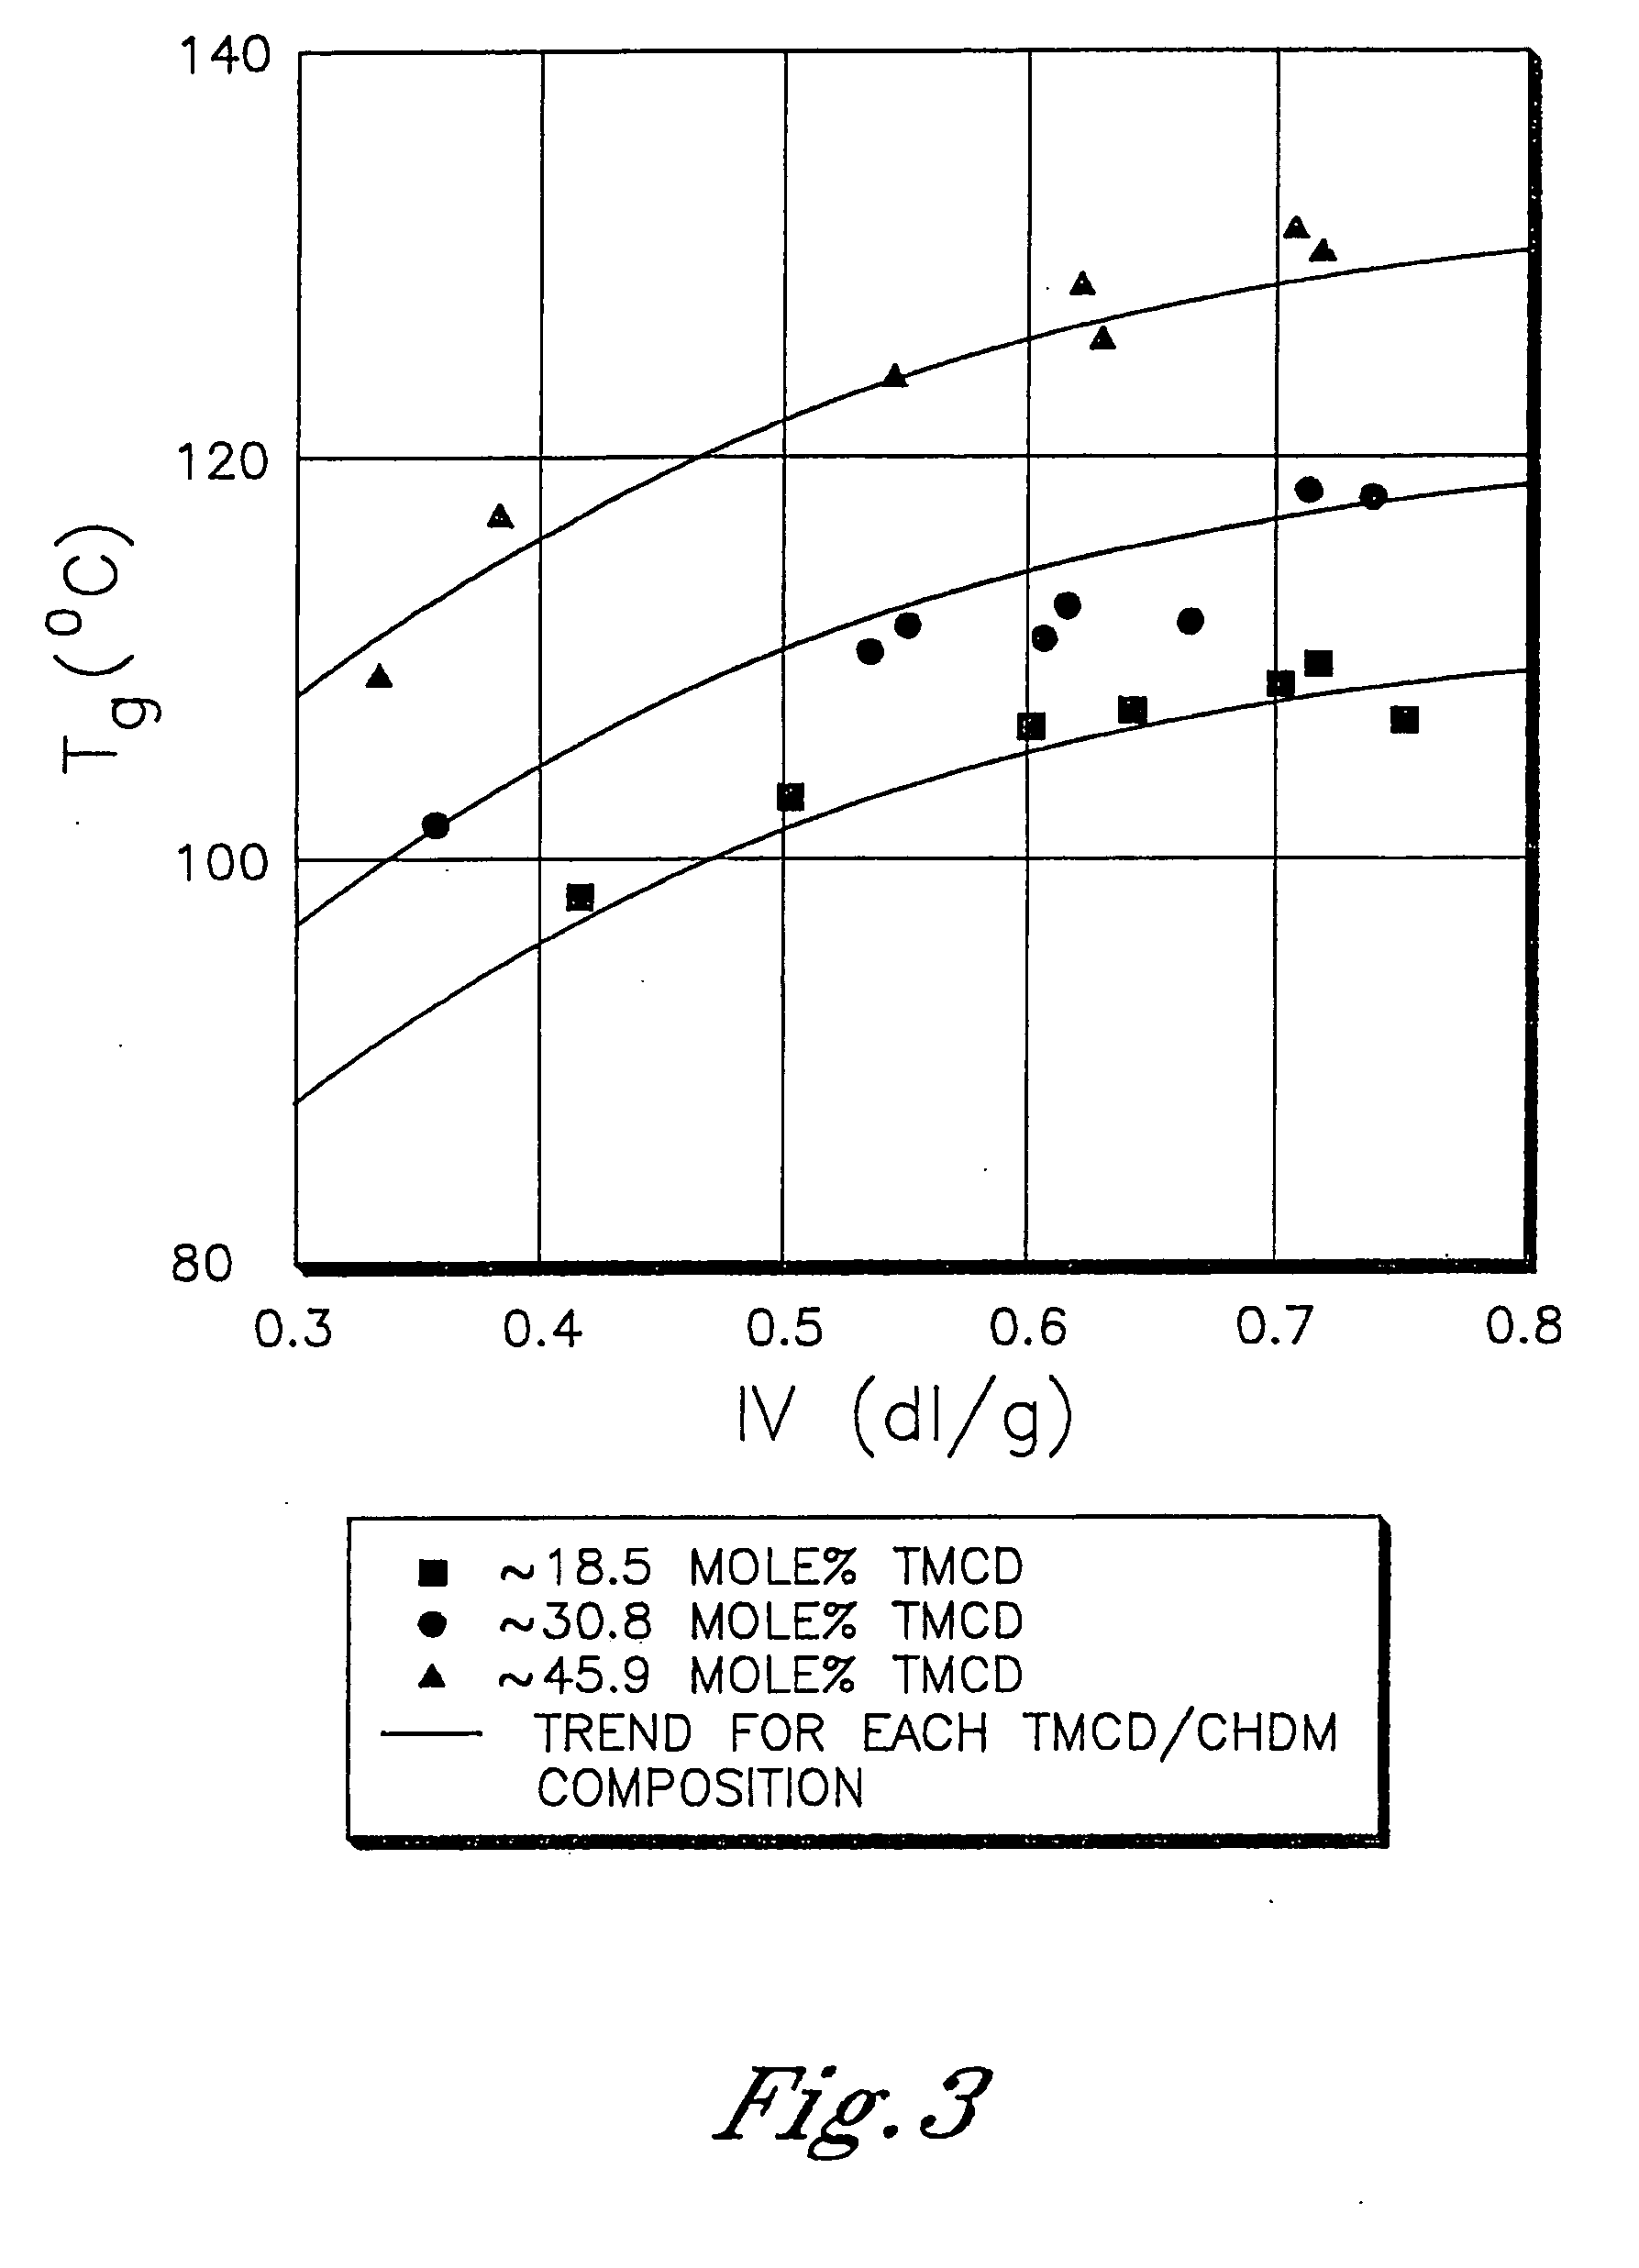 Polyester compositions containing cyclobutanediol having a certain combination of inherent viscosity and high glass transition temperature and articles made therefrom